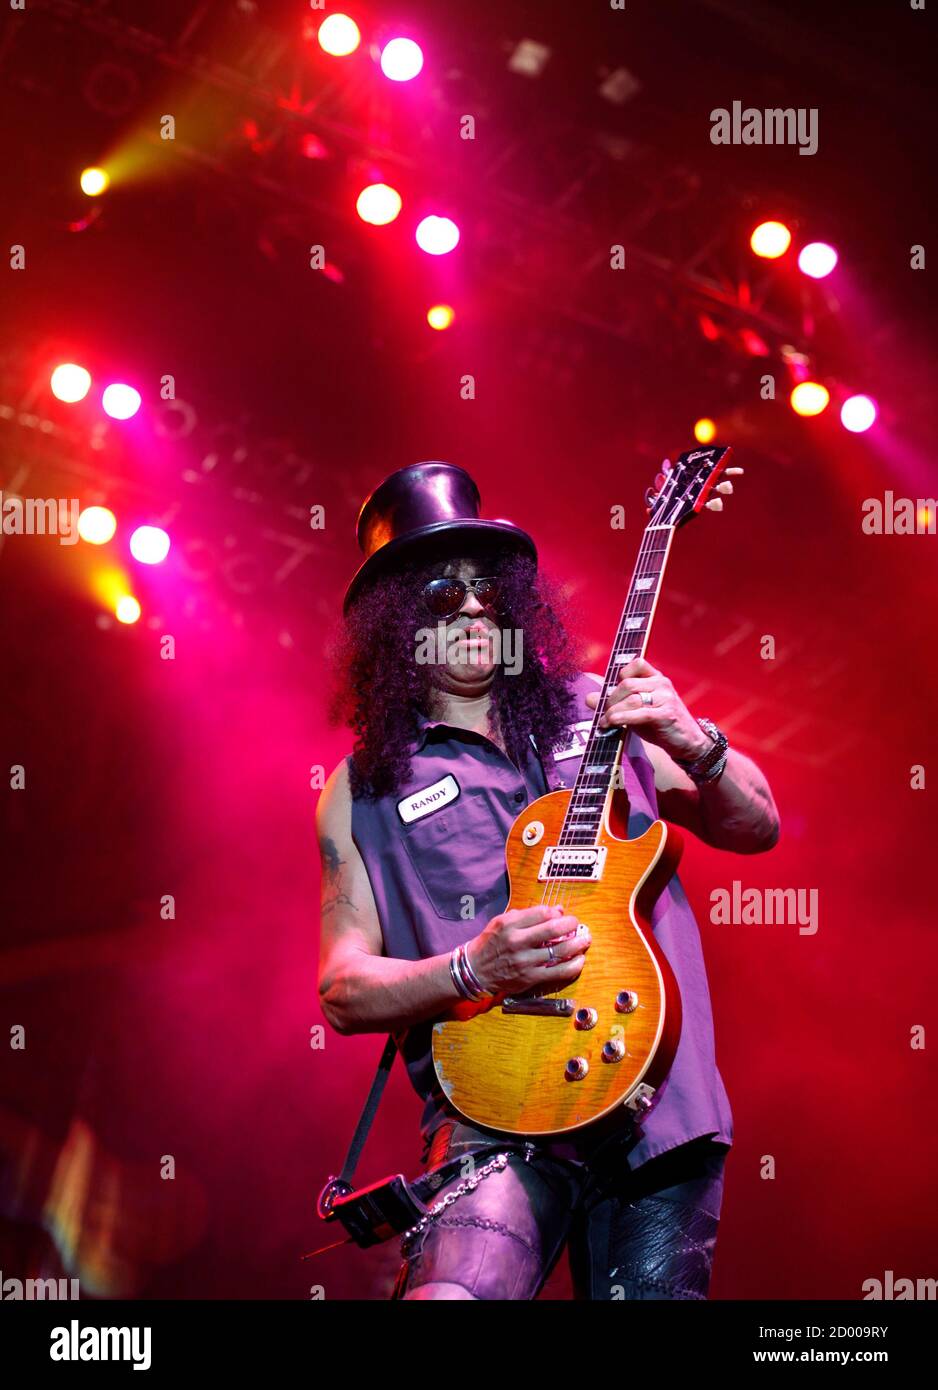 Former Guns N' Roses guitarist Saul Hudson, better known by his stage name  Slash, performs during his concert tour in Jakarta August 3, 2010. Hudson  will perform in two cities, Jakarta and